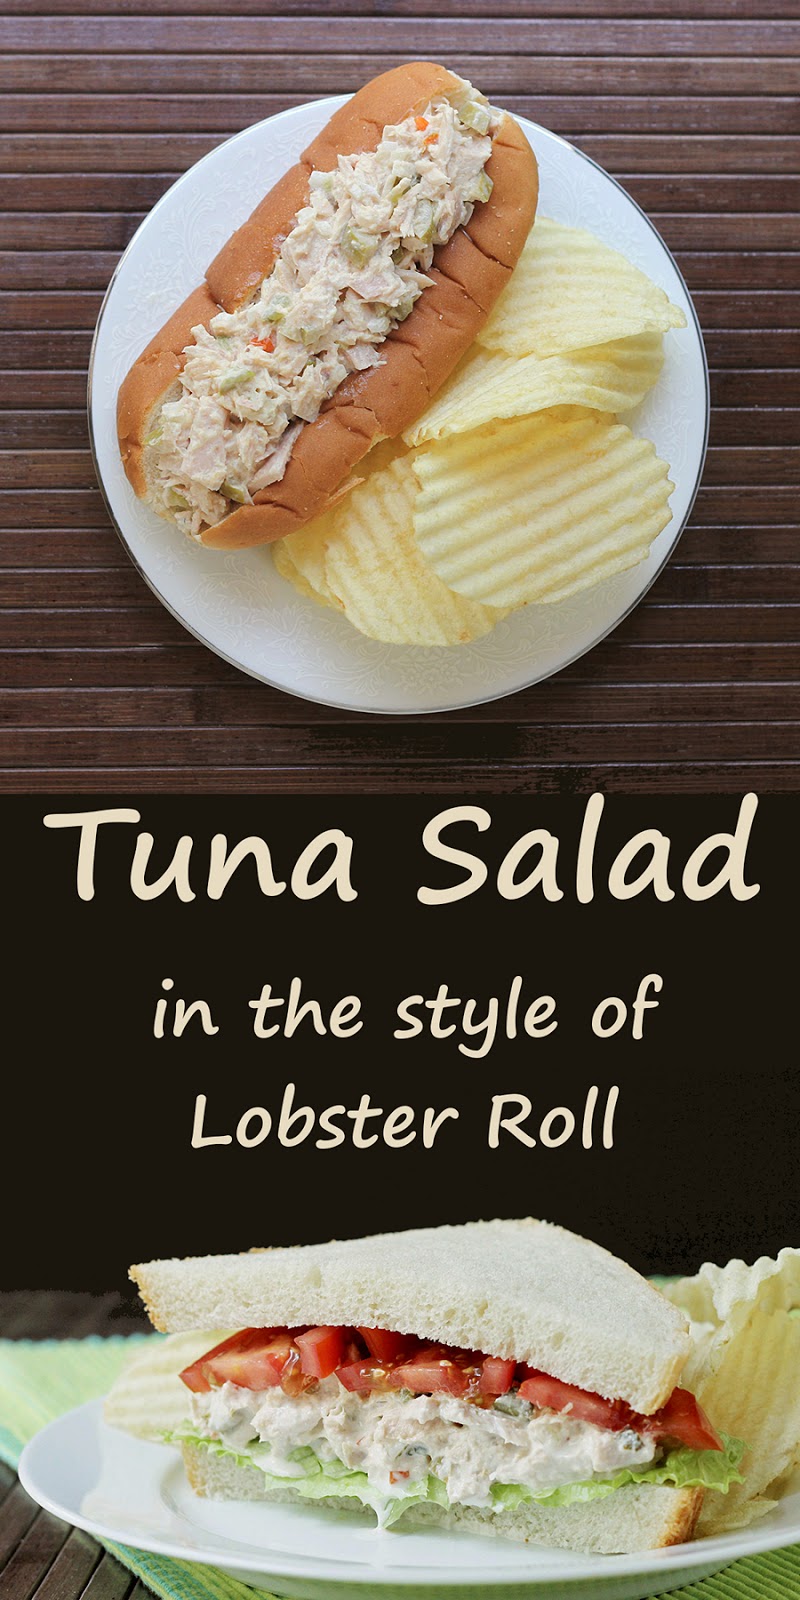 Tuna Salad in the style of lobster roll